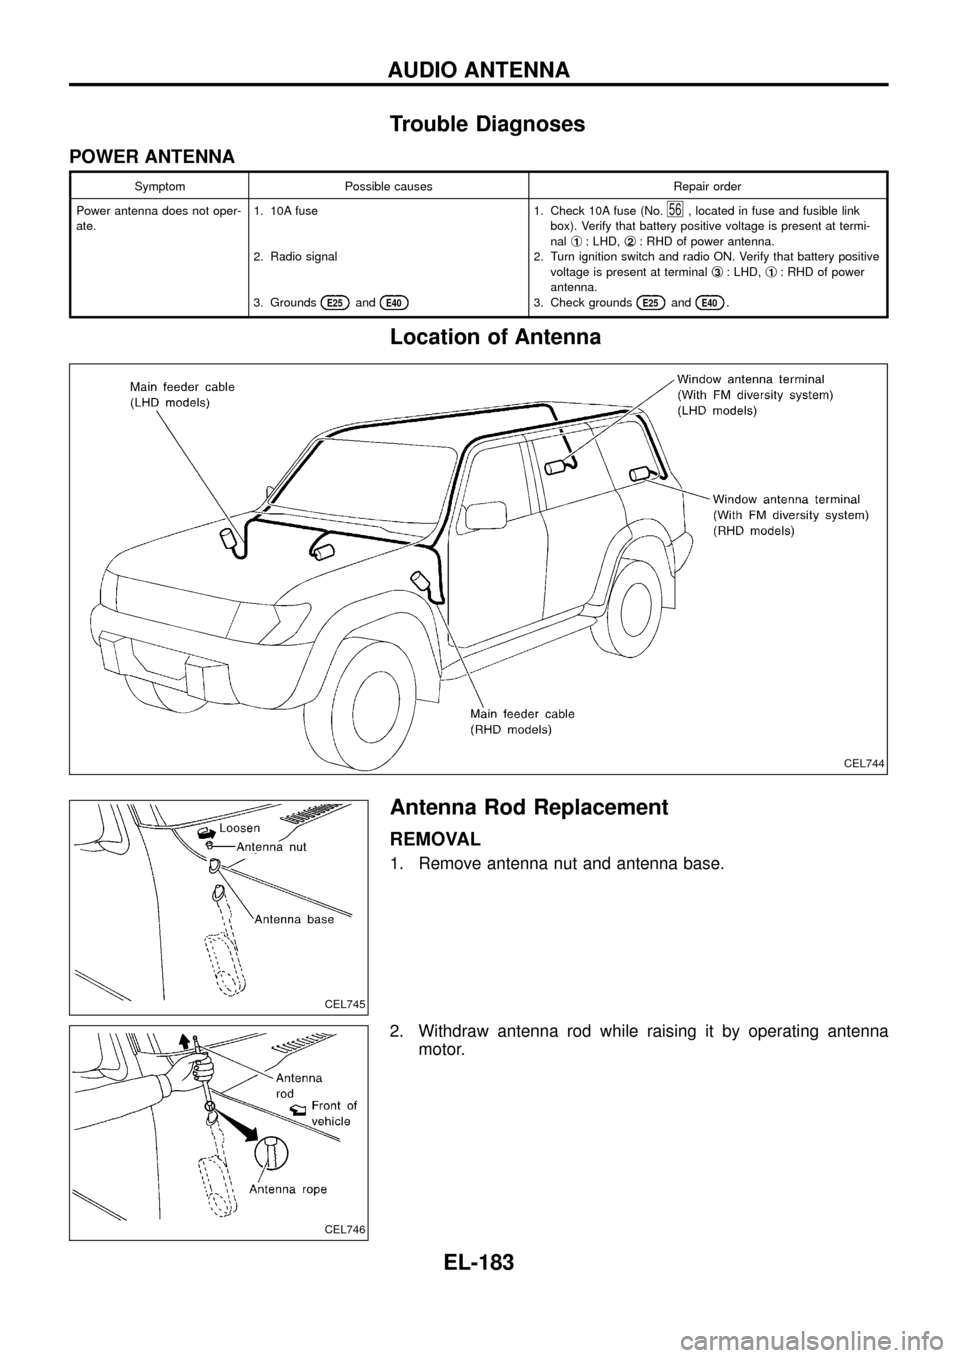 NISSAN PATROL 1998 Y61 / 5.G Electrical System Workshop Manual Trouble Diagnoses
POWER ANTENNA
Symptom Possible causes Repair order
Power antenna does not oper-
ate.1. 10A fuse
2. Radio signal
3. Grounds
E25andE40
1. Check 10A fuse (No.56, located in fuse and fus